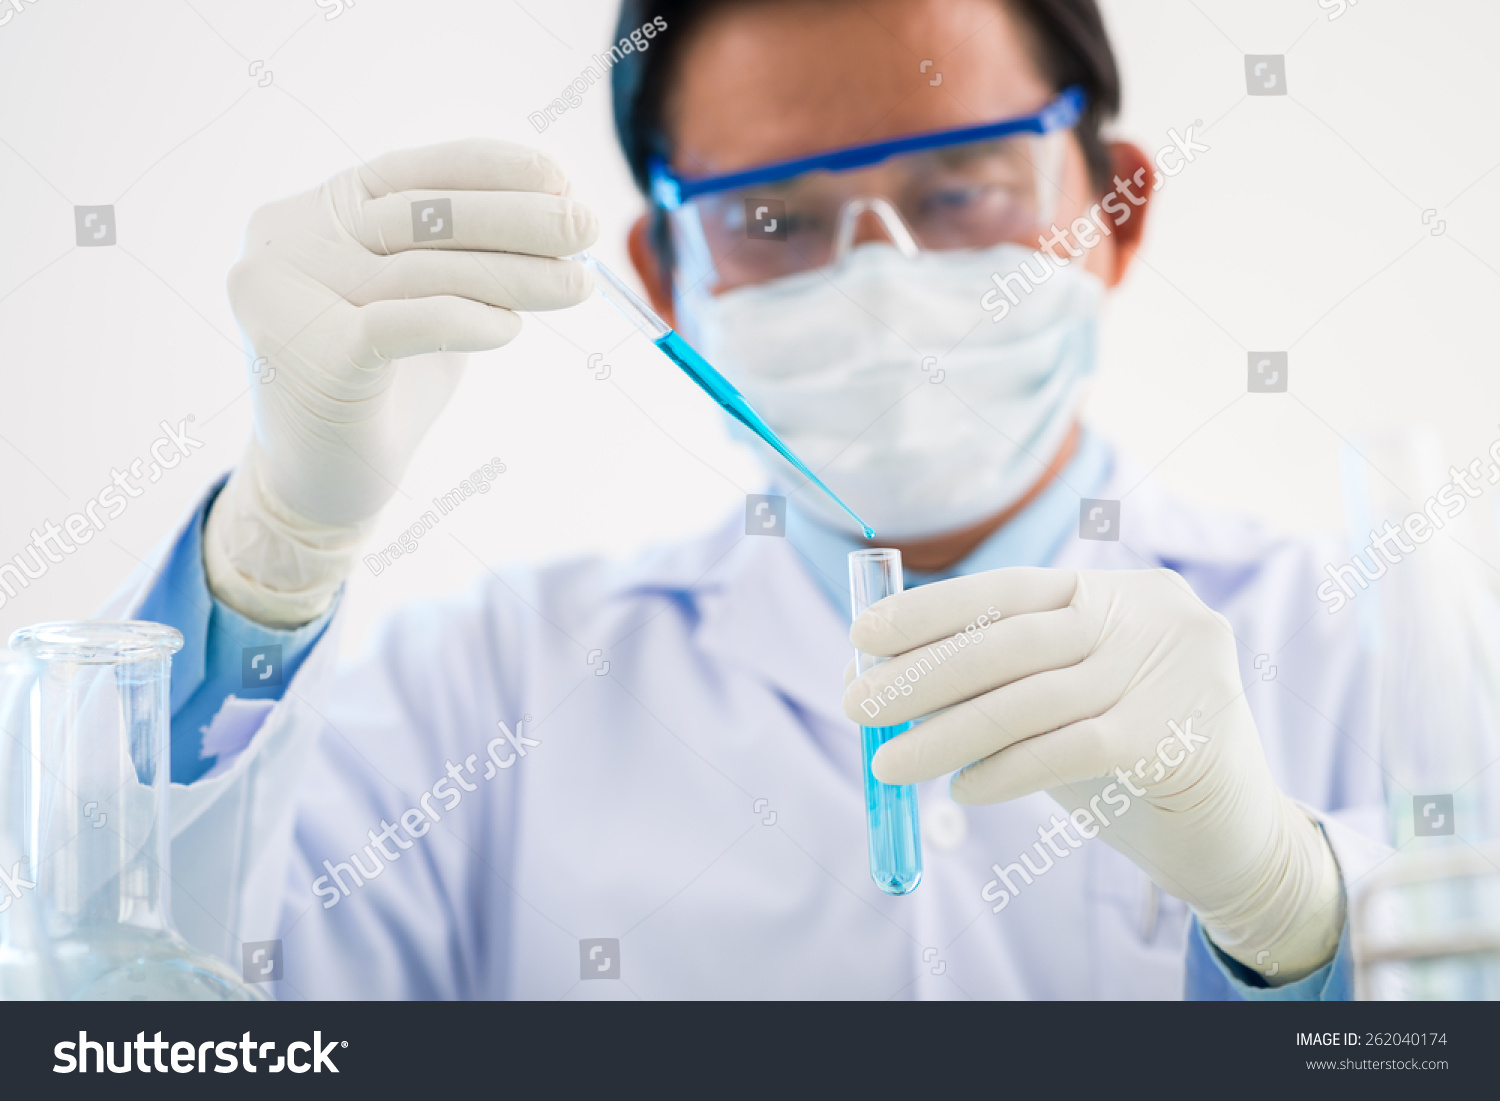 Scientist looking at tube with blue liquid #262040174